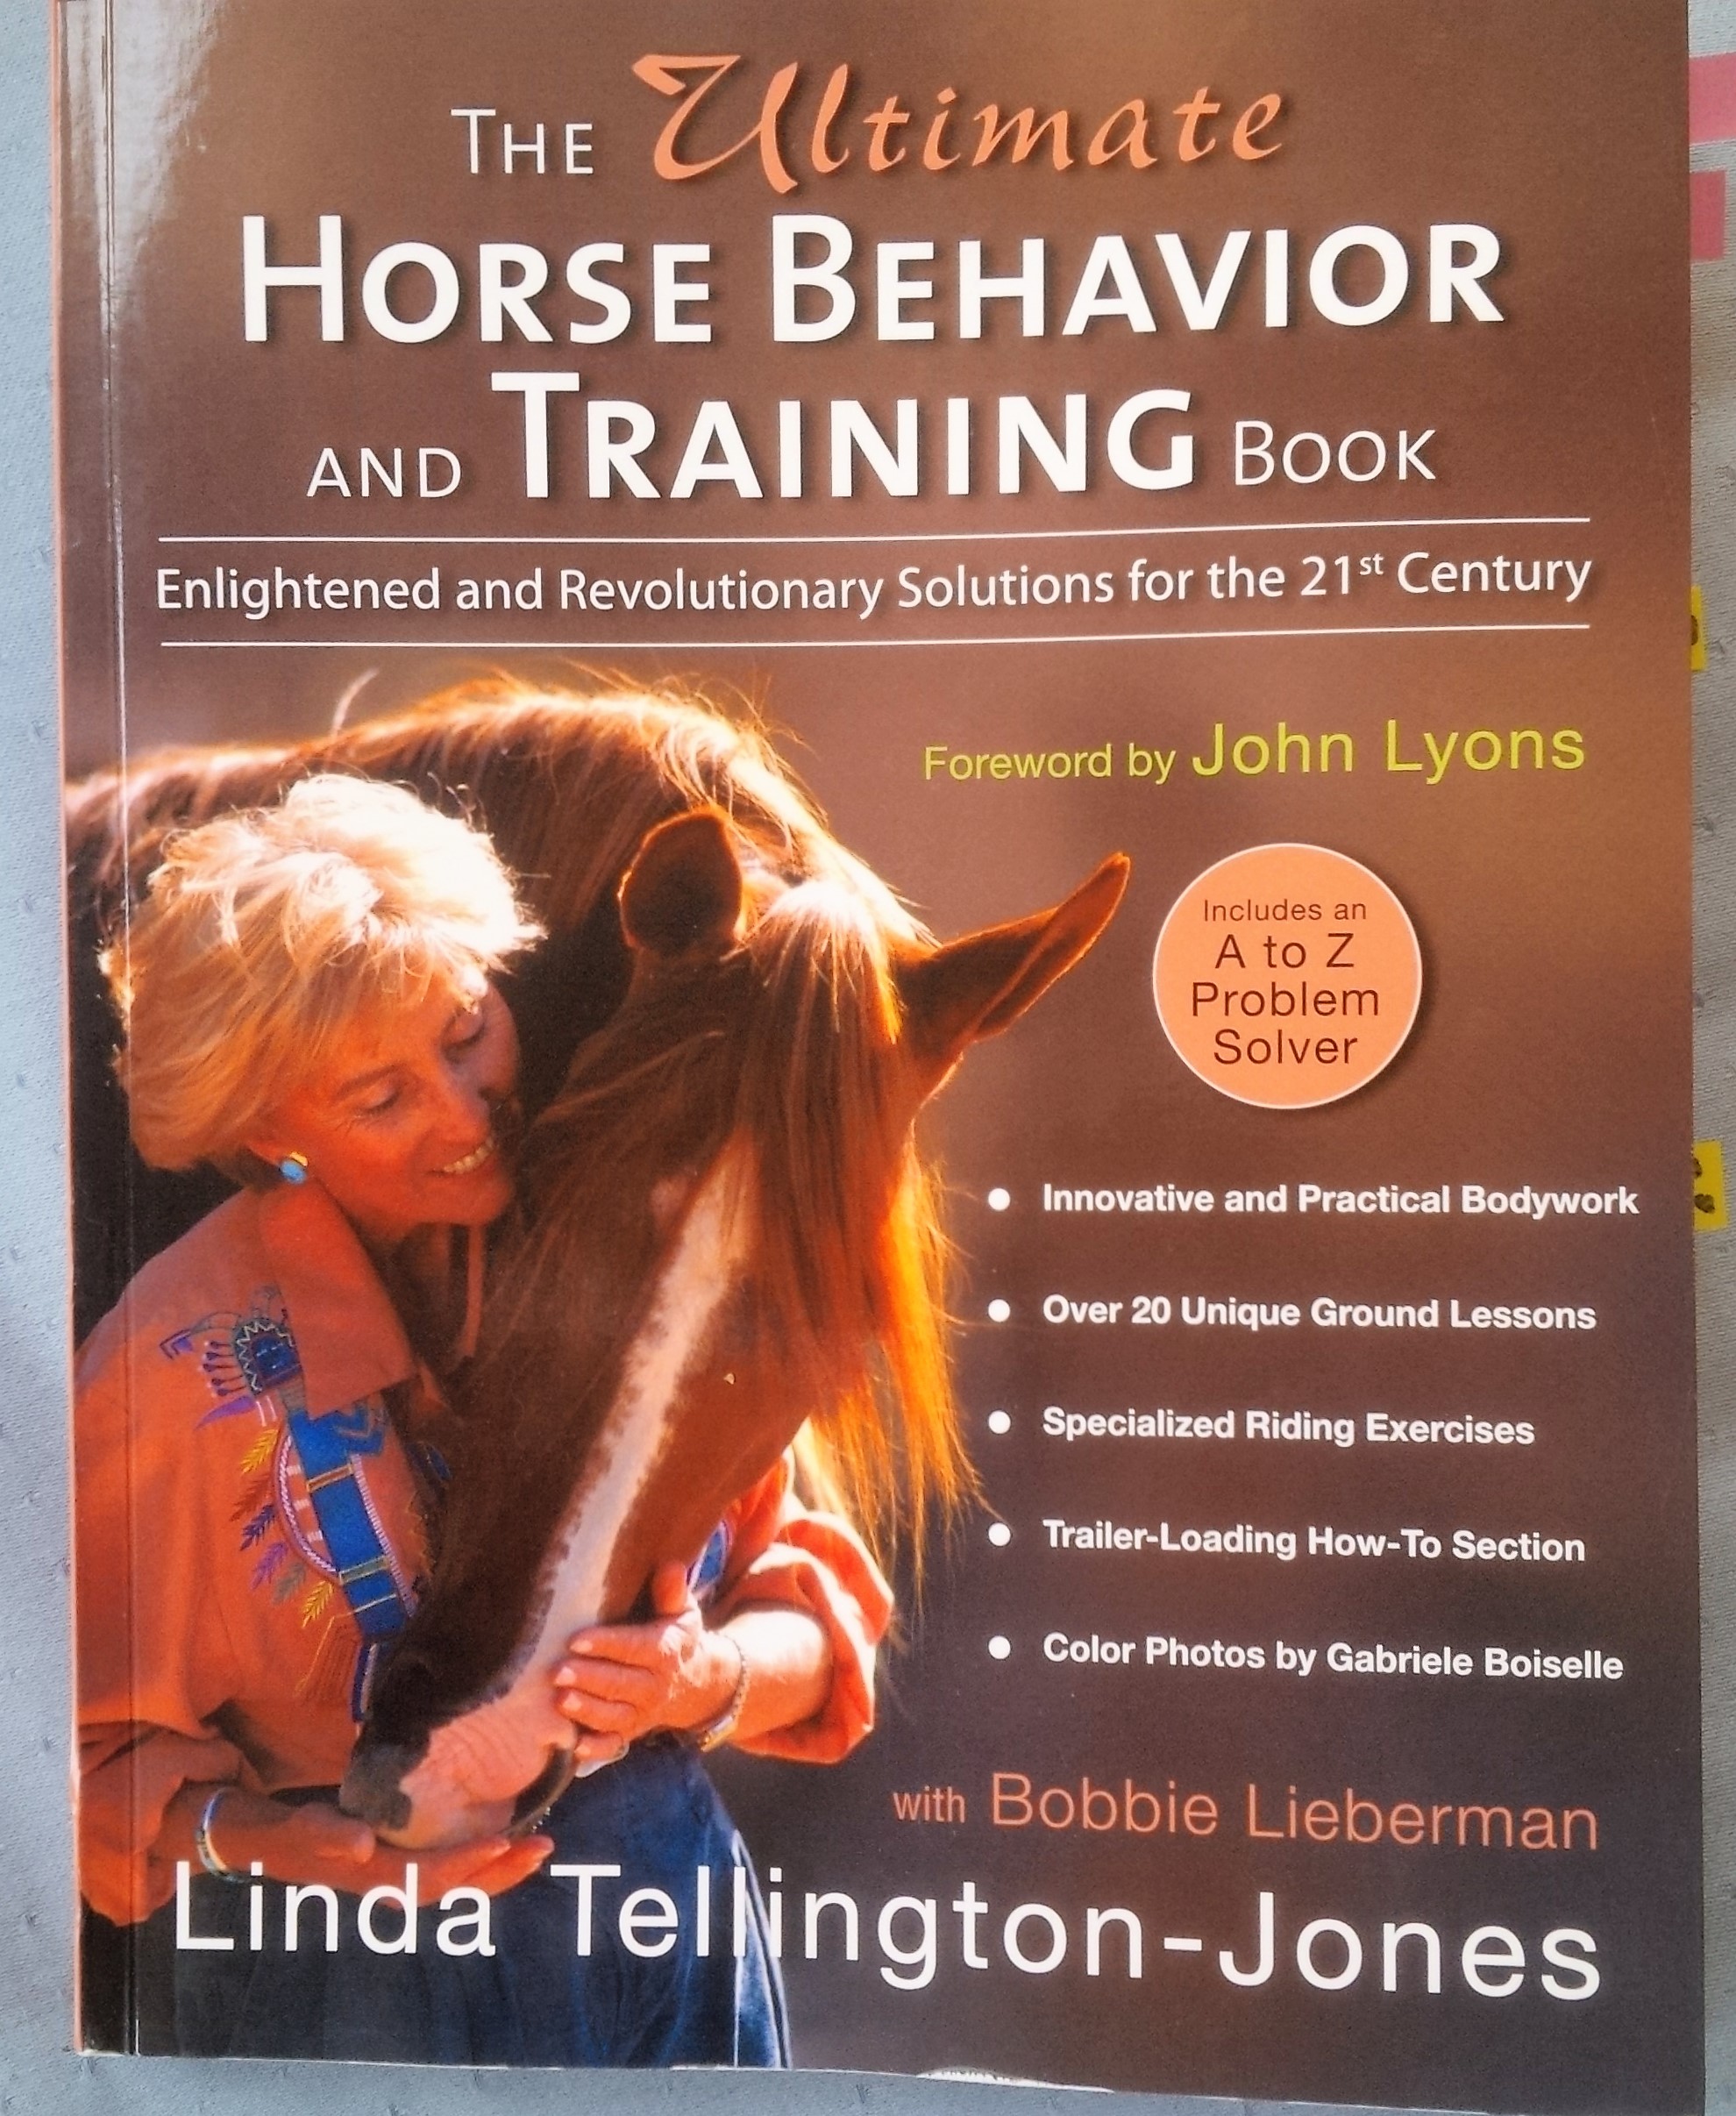 “Horse Behavior and Training” Book Review